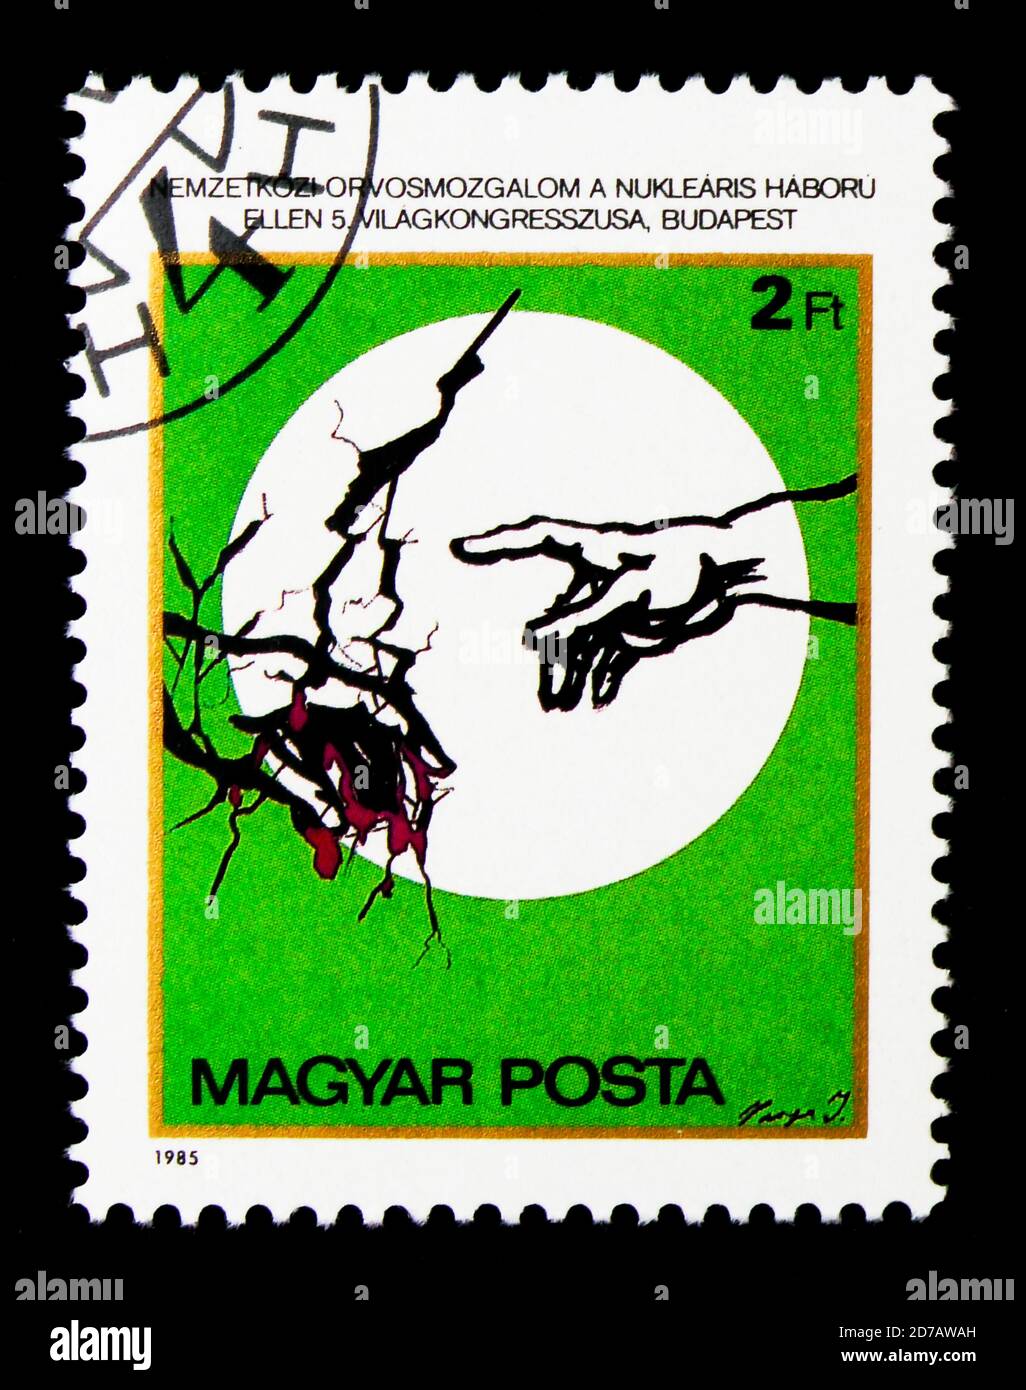 MOSCOW, RUSSIA - NOVEMBER 26, 2017: A stamp printed in Hungary shows Prevention of Nuclear War, serie, circa 1985 Stock Photo